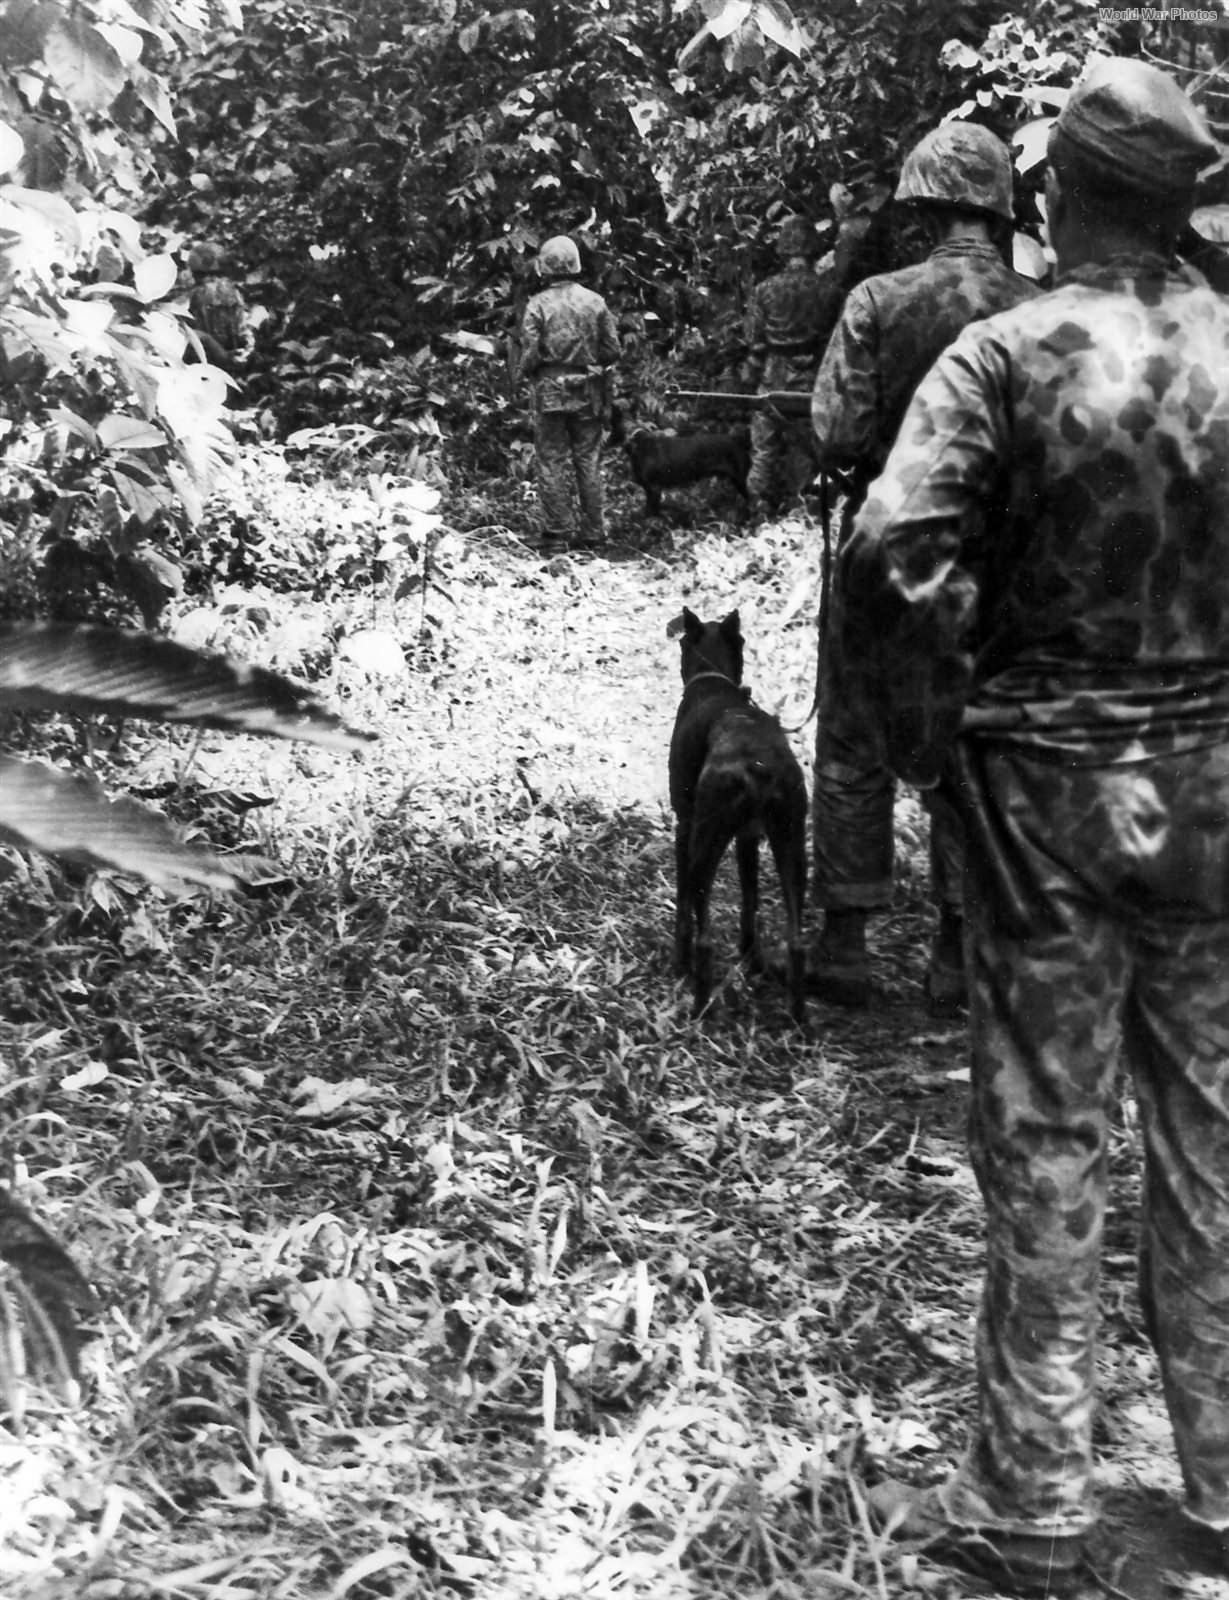 2nd Raider Battalion and war dogs during a patrol